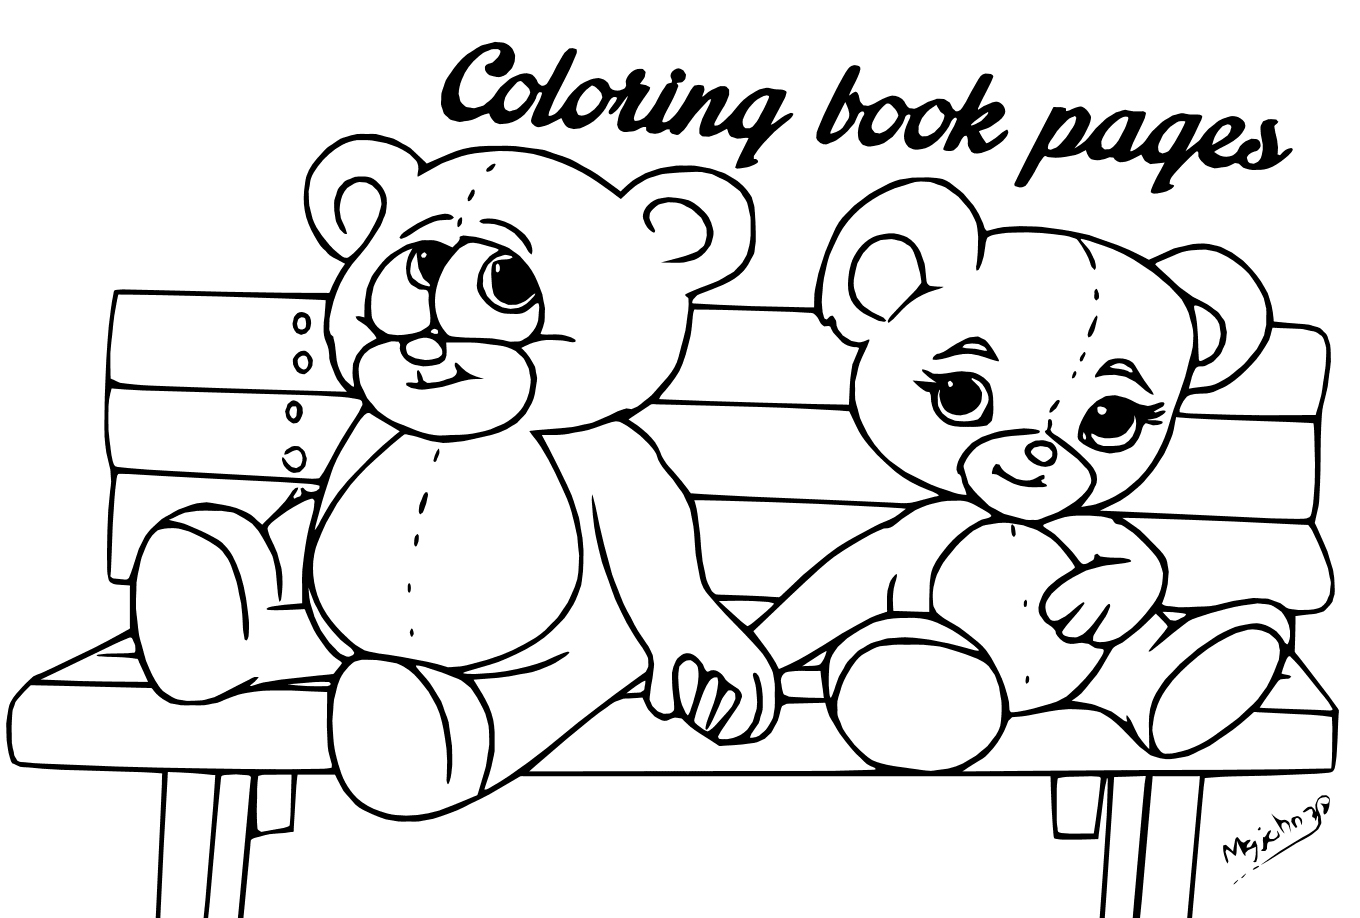 Coloring Book Pages - Astro Blog